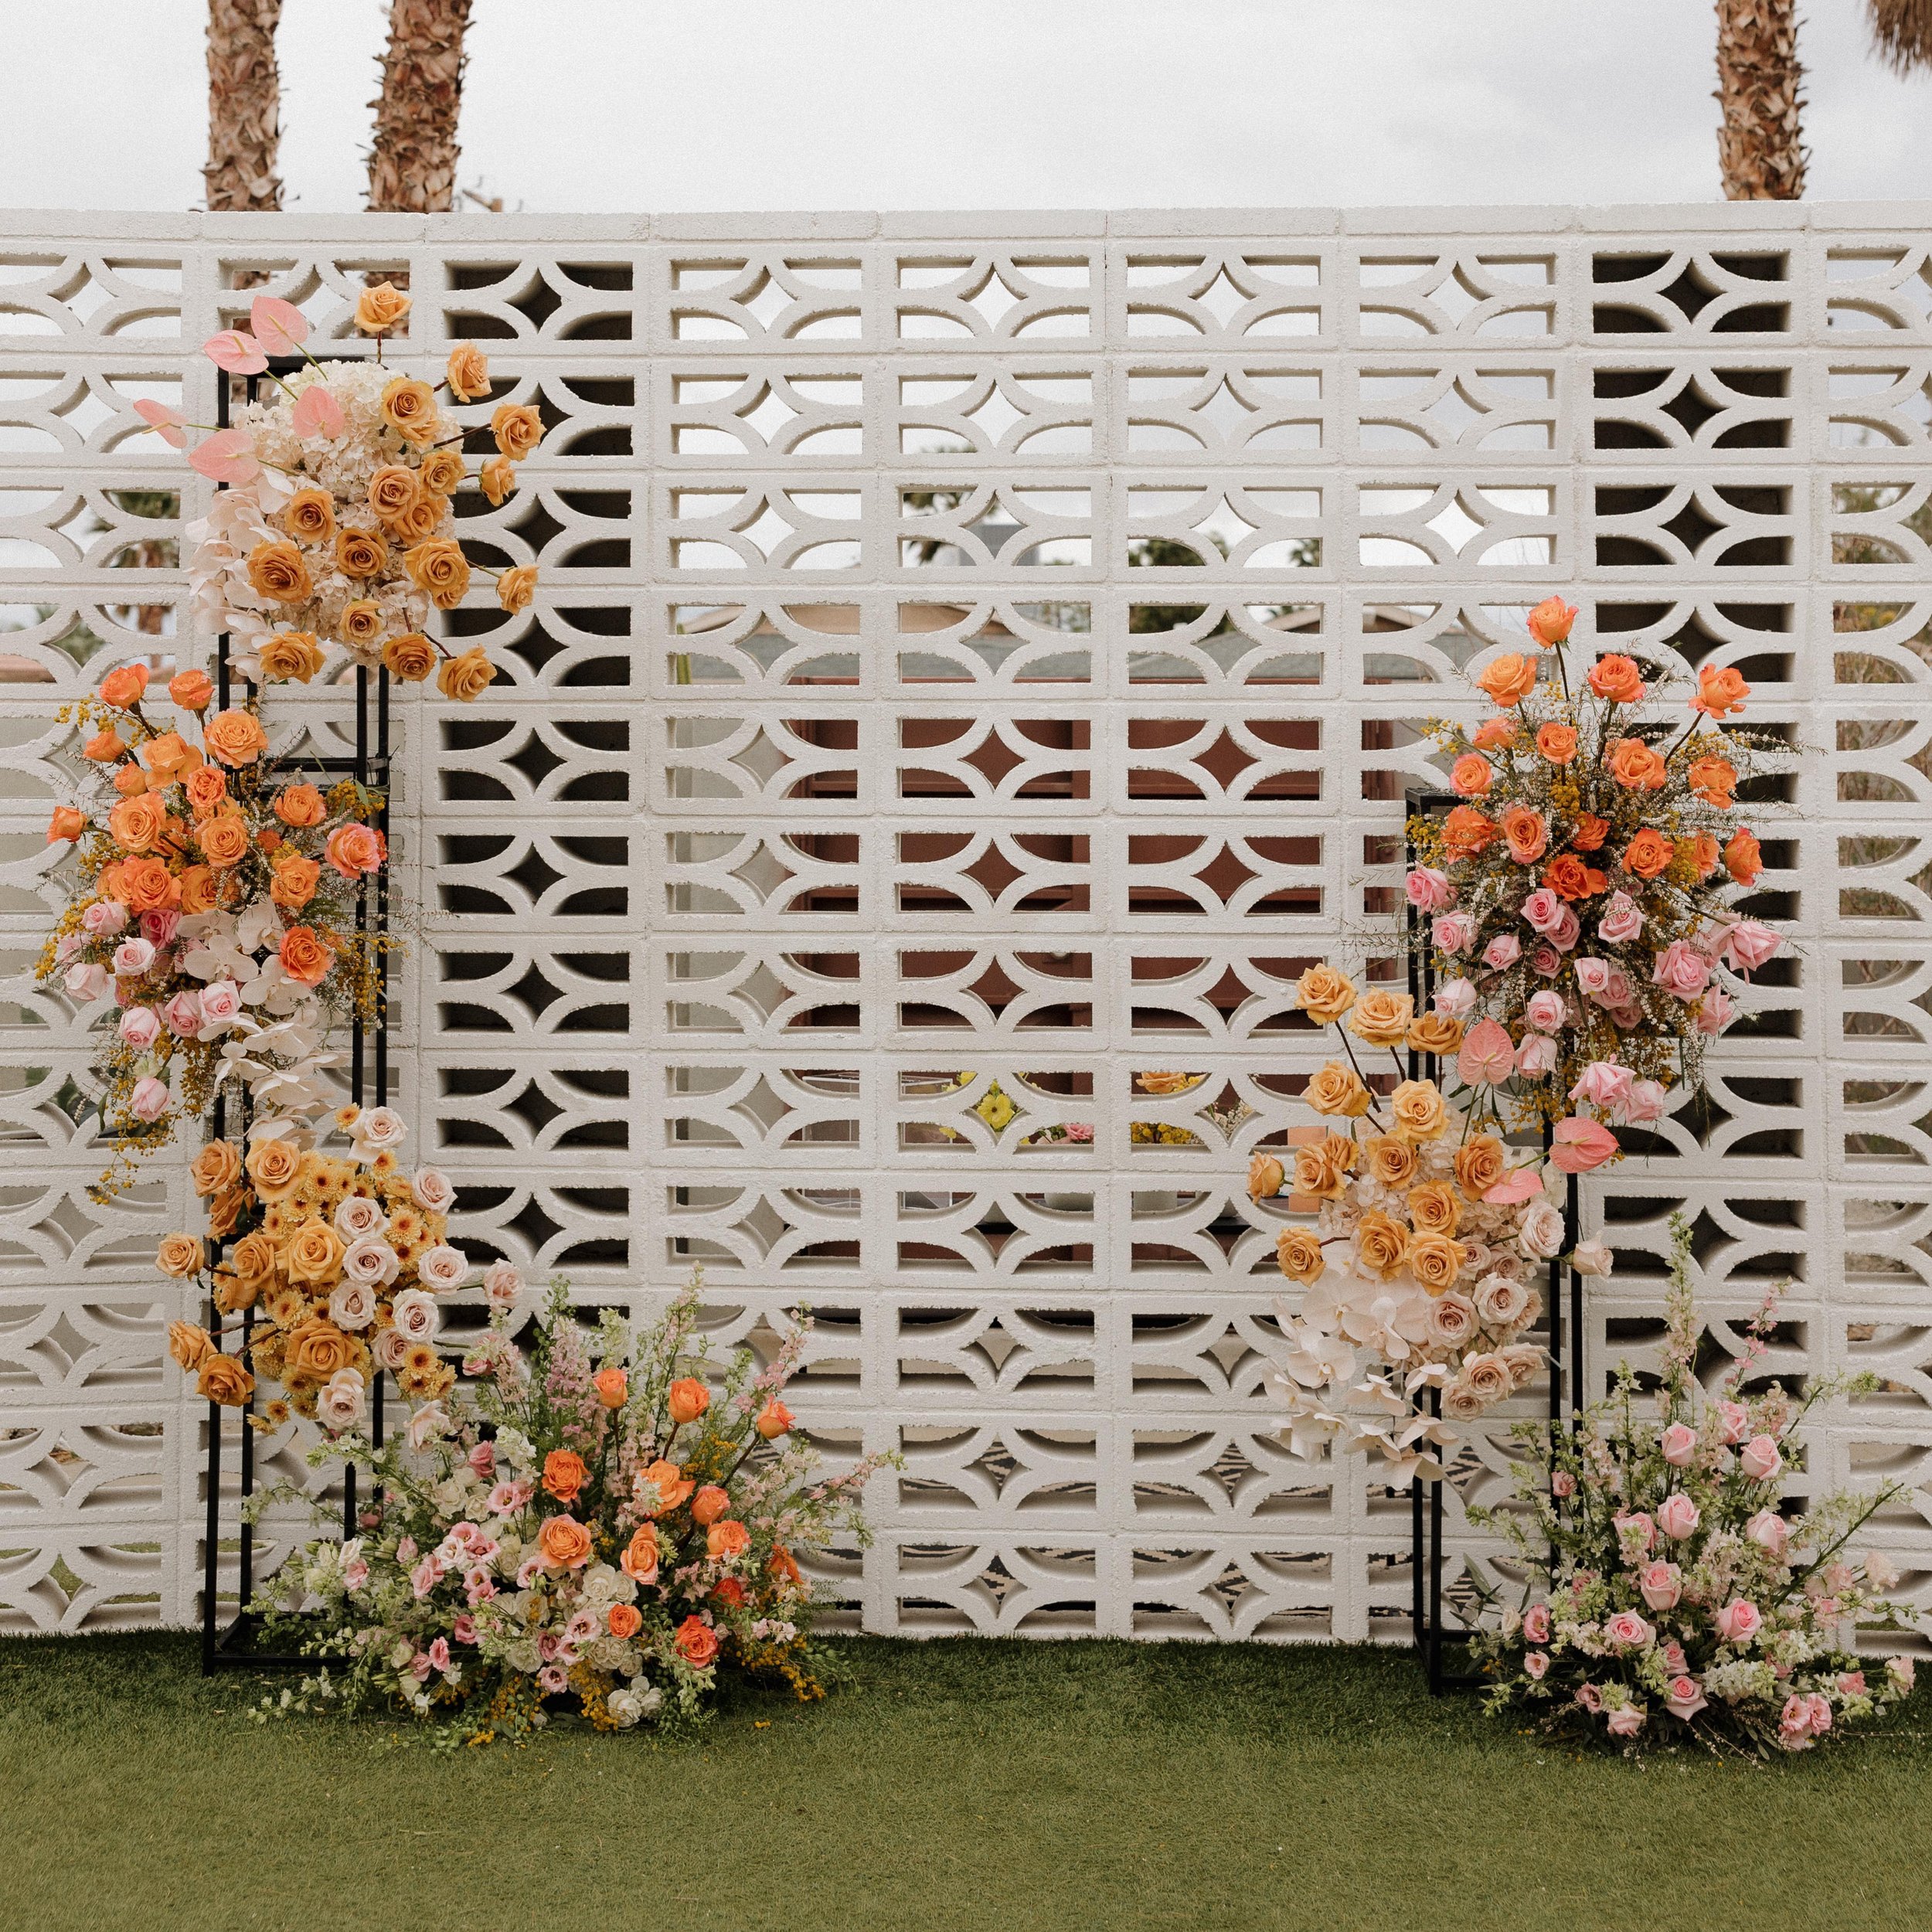 A funky fun spring altar
.

.
Venue: @thelautnercompound
Catering: @f10_catering
Bar: @cocktailconcierge
Planning + Design: @fetelledesigns
Photography: @ashgabes_photography
Content Creator: @cupidcontentco
Florals: @joyofbloomflorals
Stationery + S